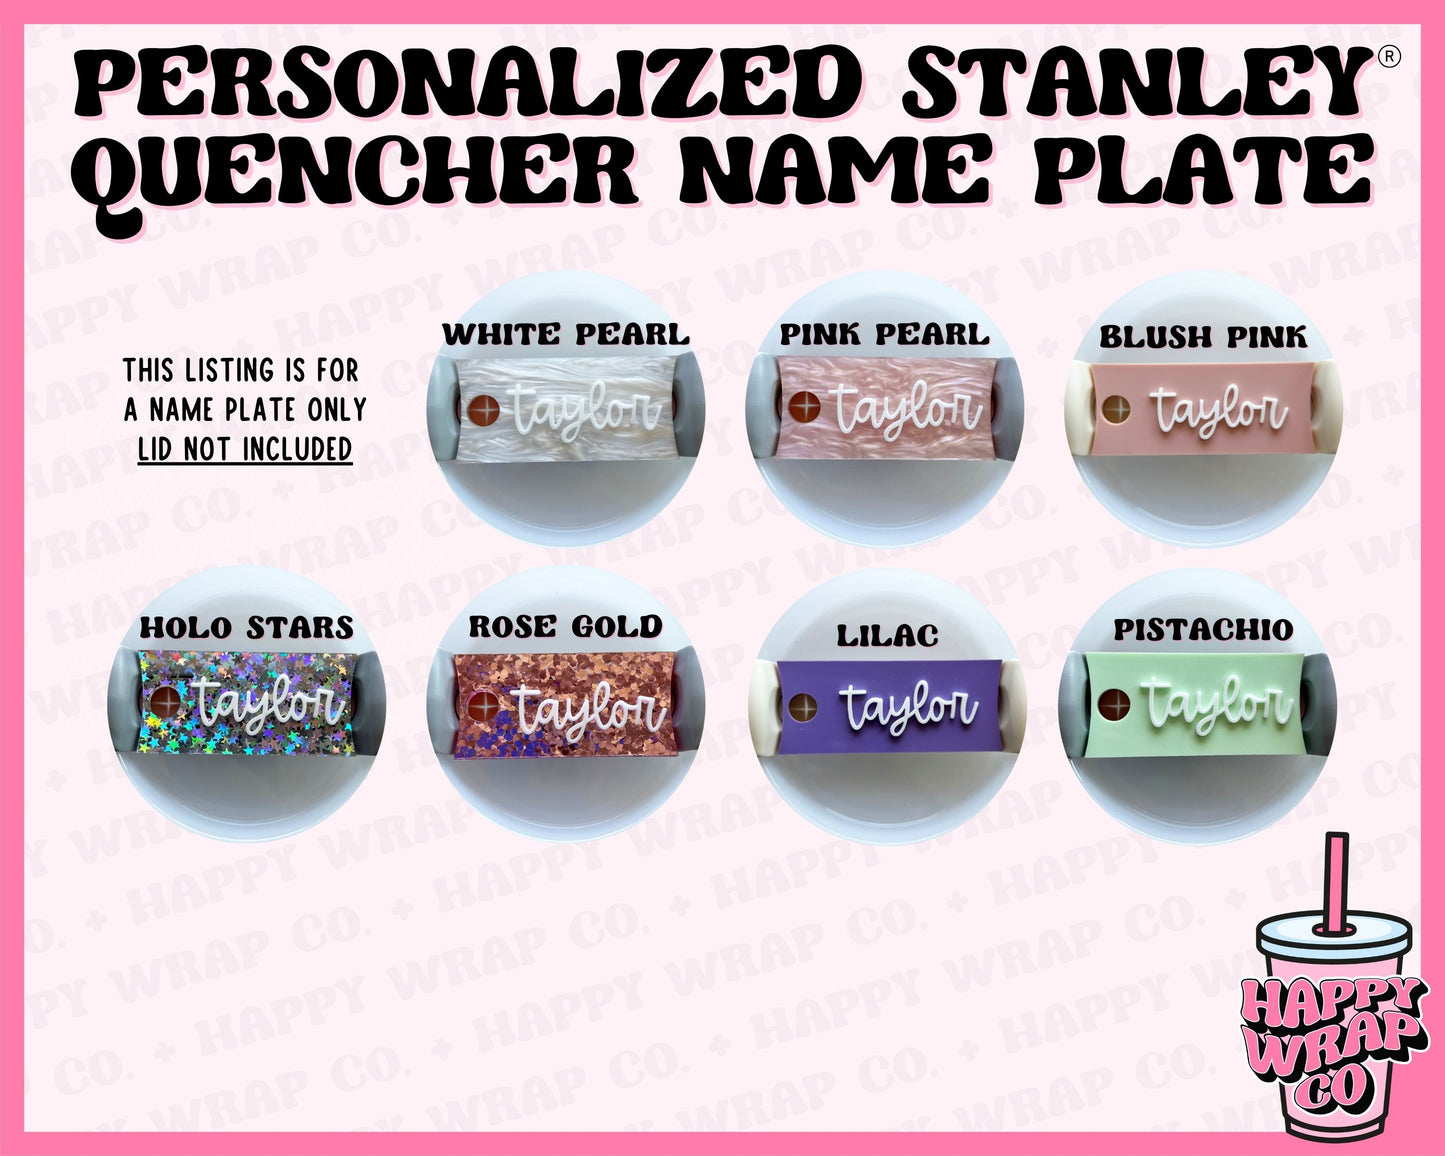 Stanley 30 oz Personalized Name Plate